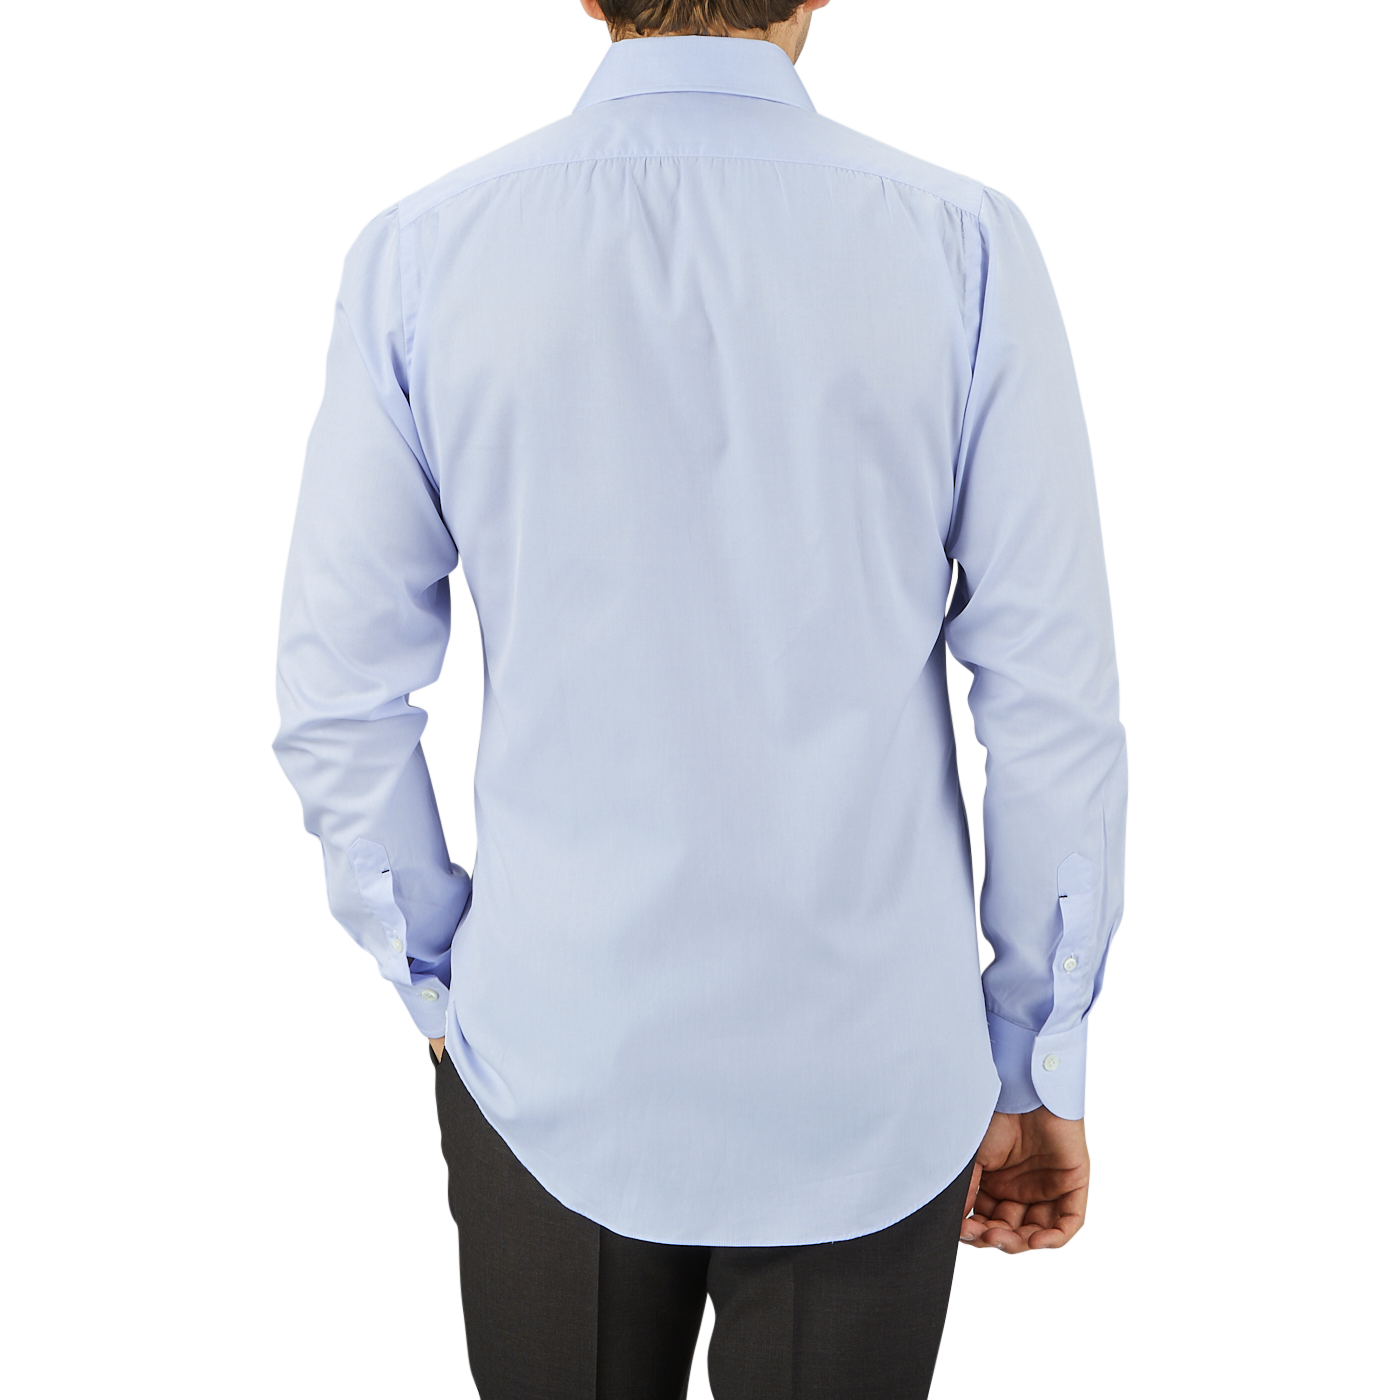 A man viewed from behind, wearing a Mazzarelli Light Blue Cotton Twill Cut Away Slim Shirt with a cutaway spread collar and dark trousers, standing against a neutral gray background.